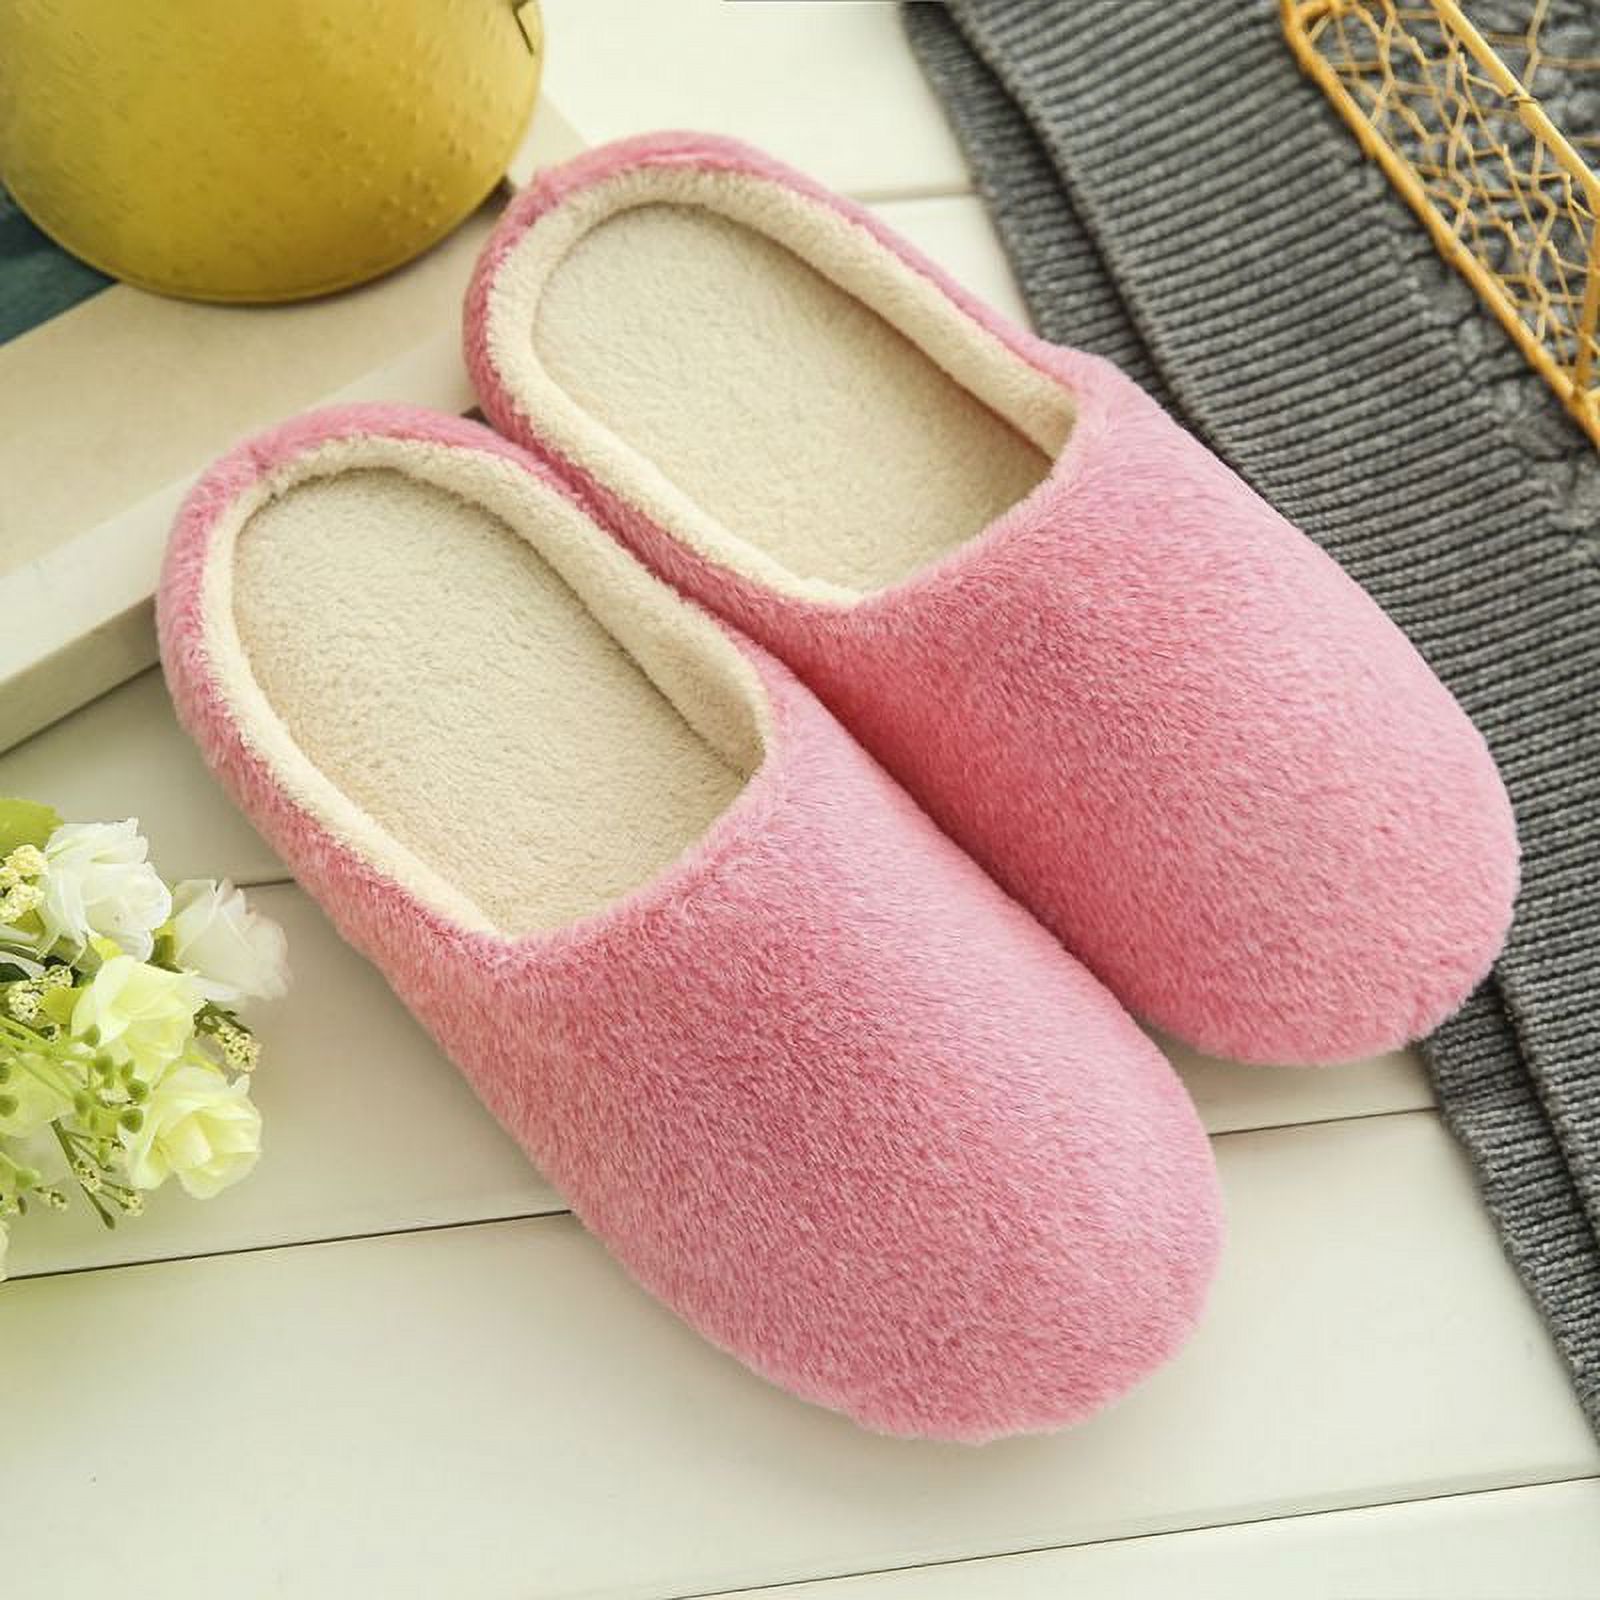 Clearance Women Men Winter Warm Fleece Anti-Slip Slippers Indoor House Shoes Lovers Home Floor Slippers Shoes - image 1 of 5